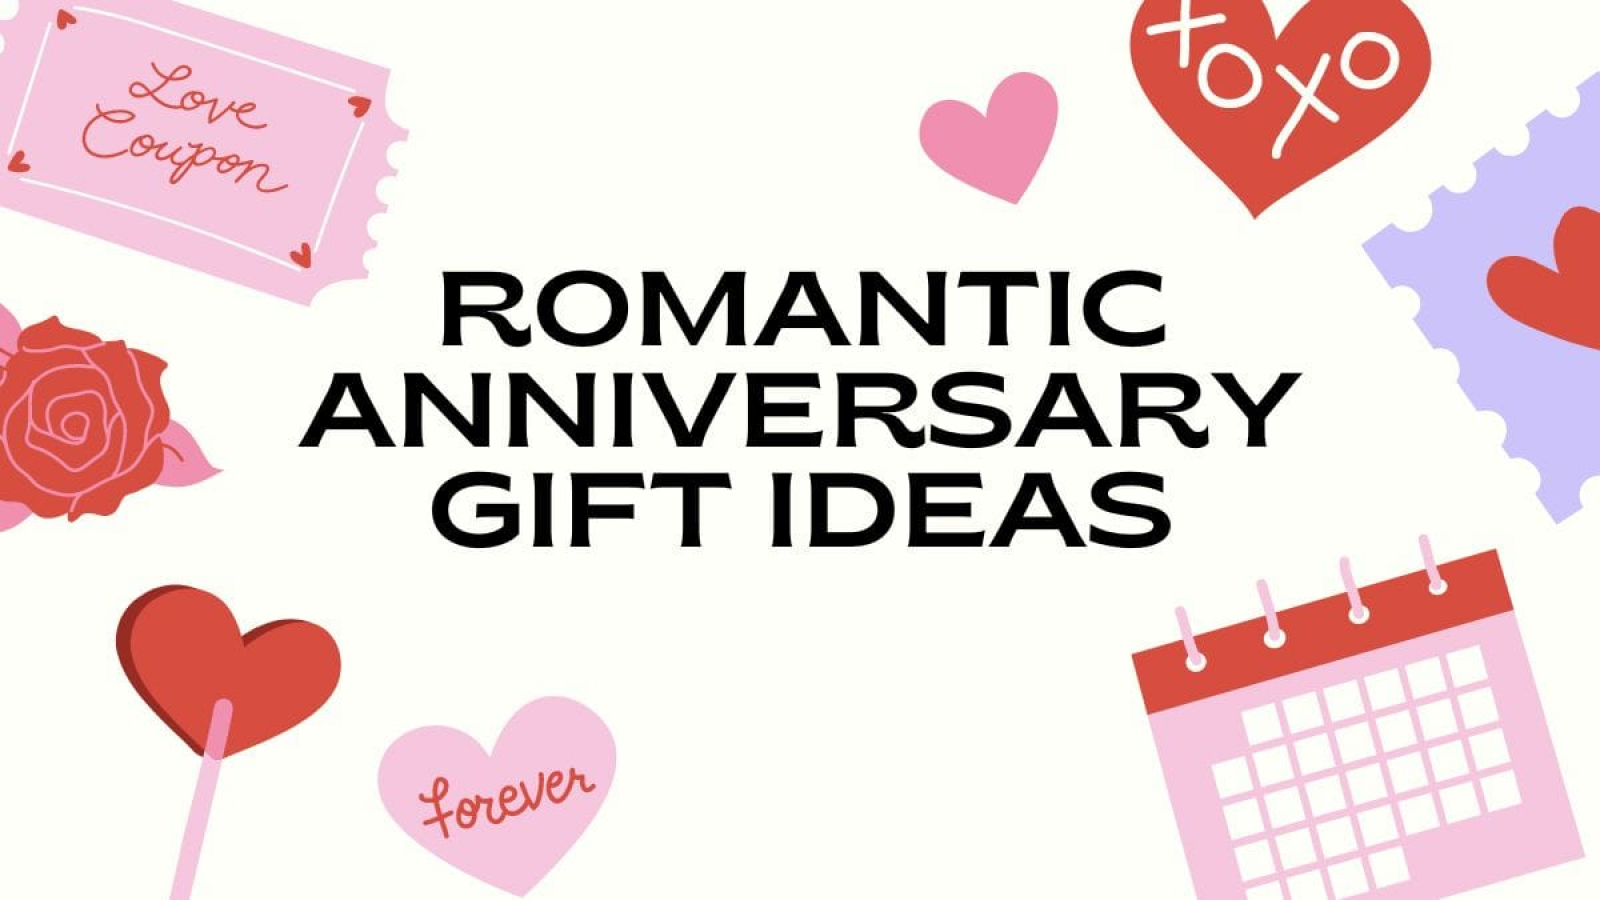 16 Romantic Anniversary Gift Ideas for Your Spouse in 2023